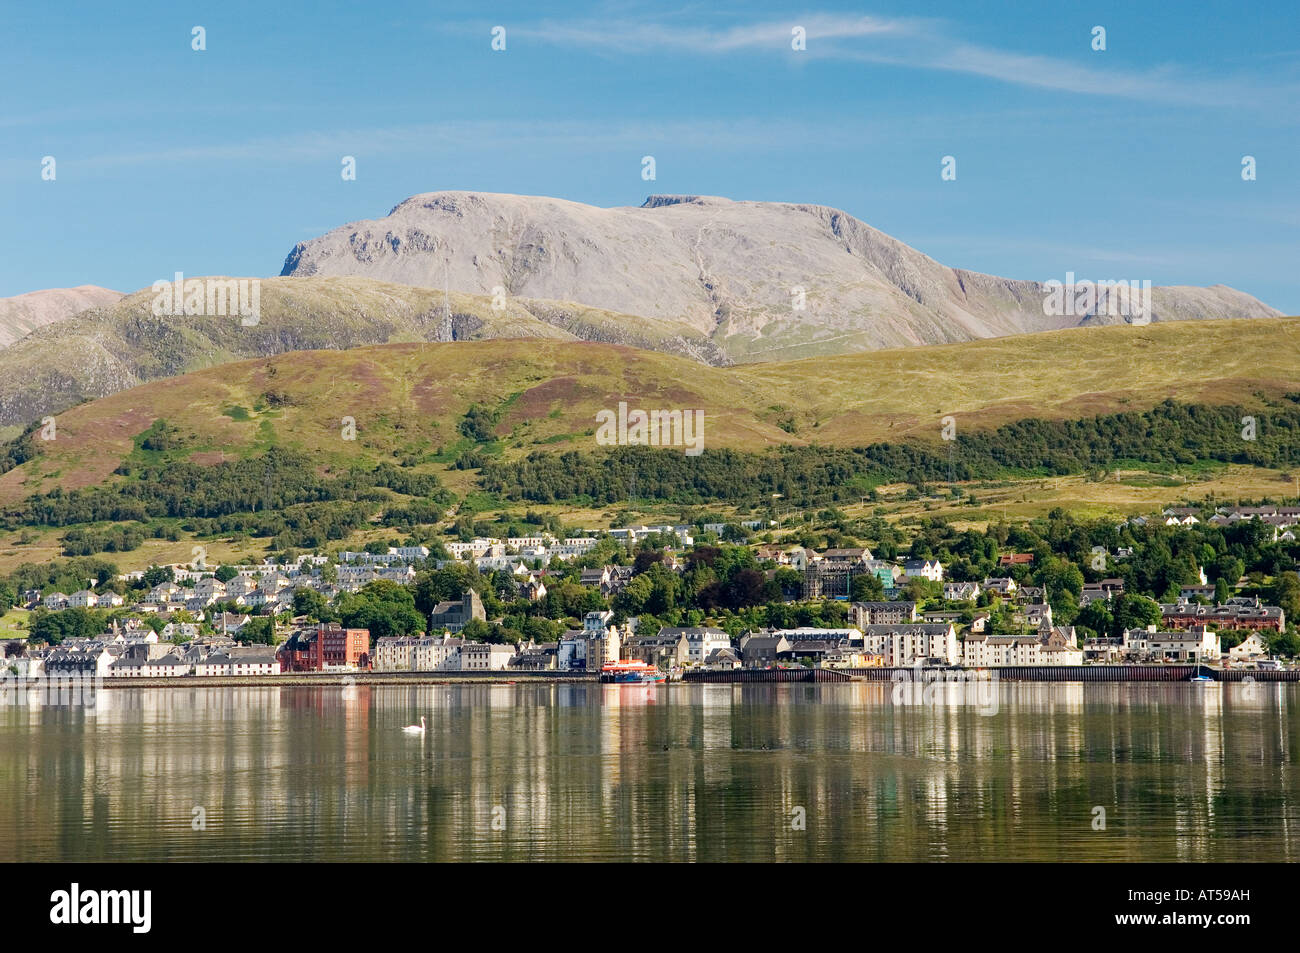 Ben Nevis, highest mountain in UK, rises above Fort William at the head of Loch Linnhe. Western Highlands, Scotland. Summer Stock Photo